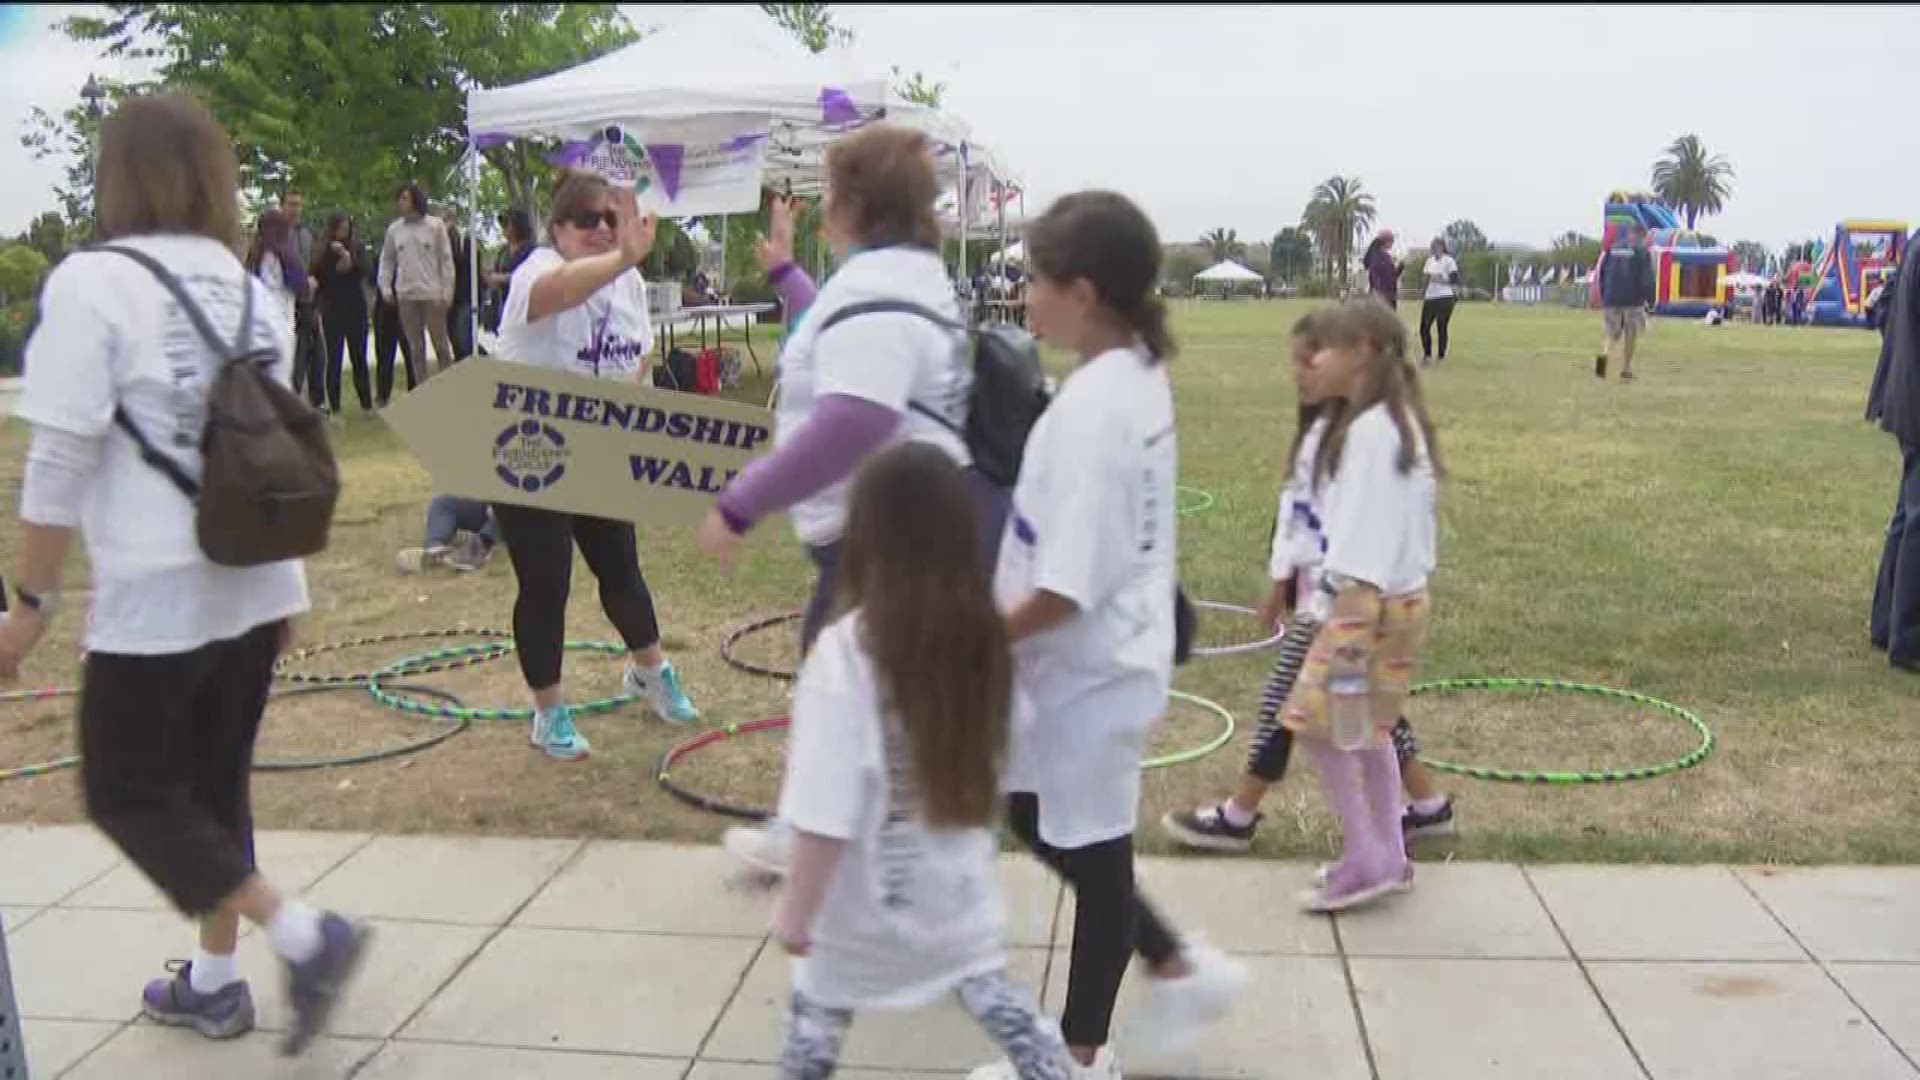 The yearly walk serves as a fundraiser for Friendship Circle - an organization dedicated to supporting children with special needs.